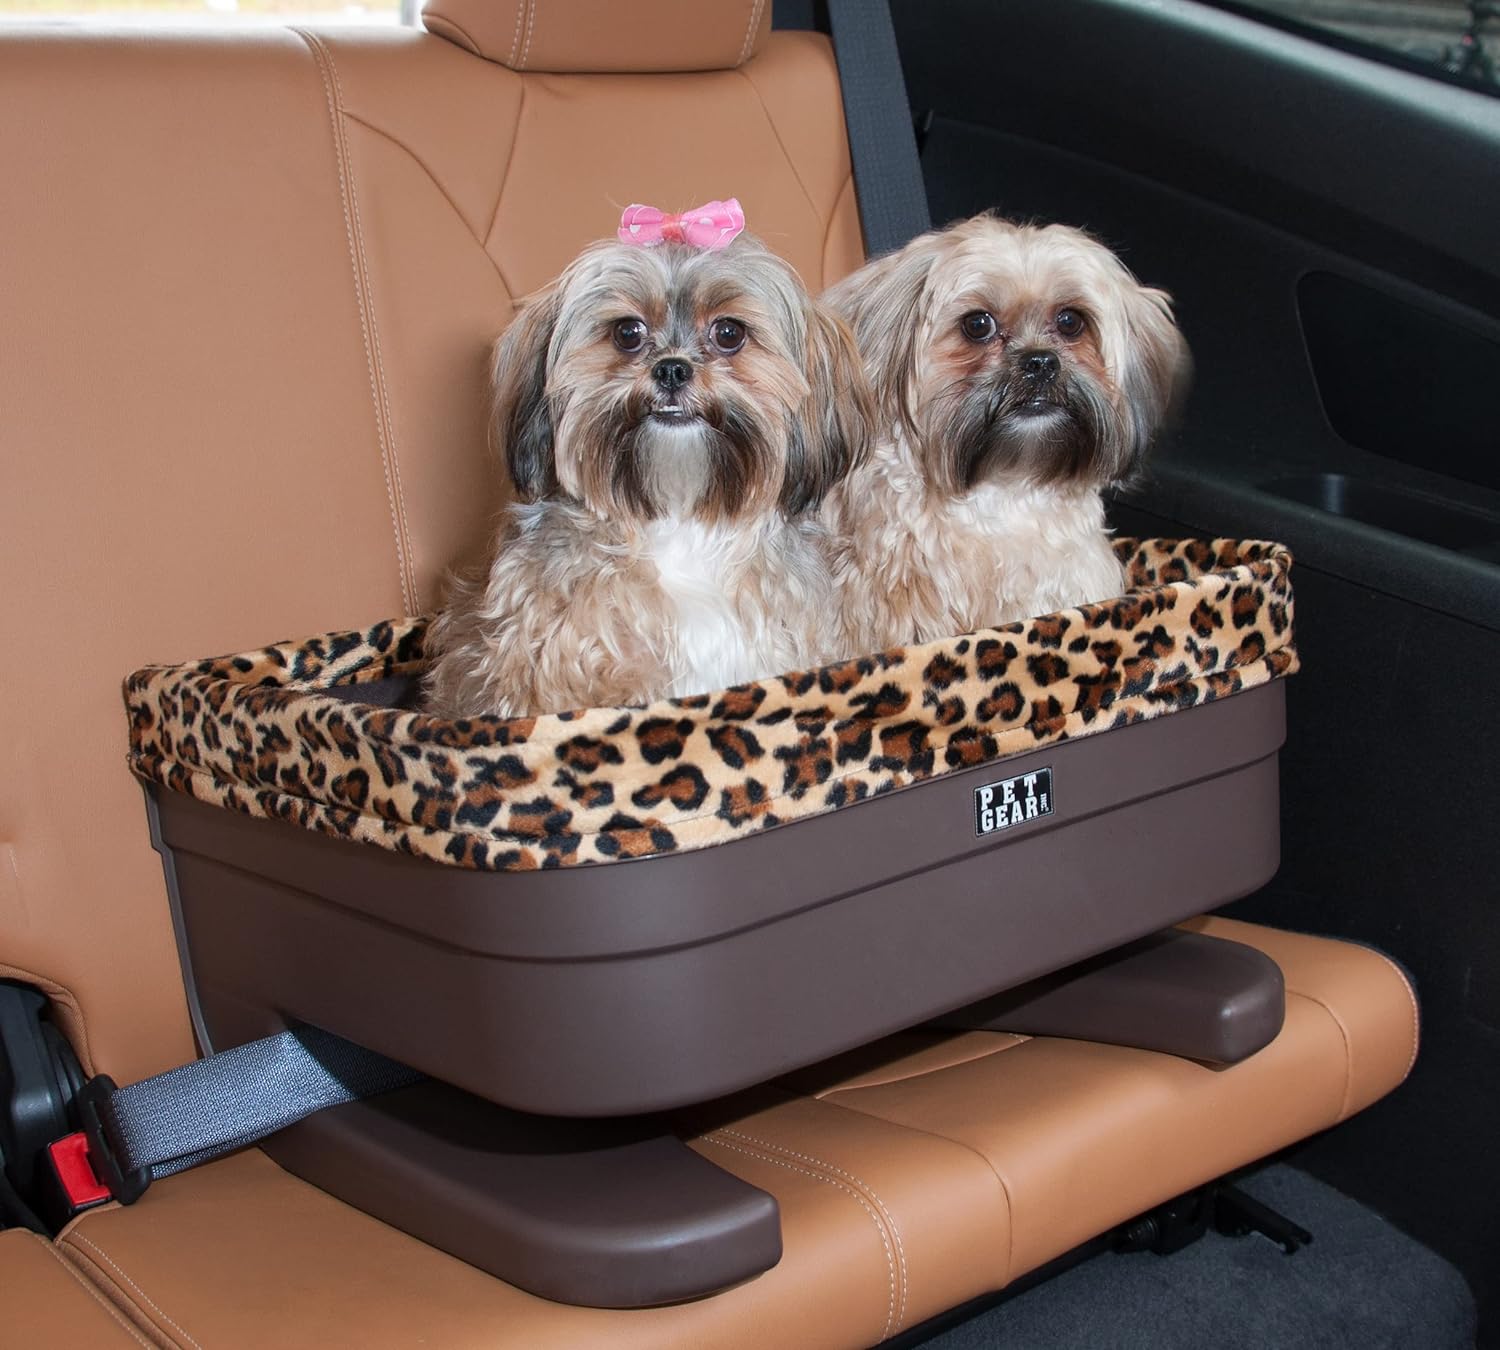 Pet Gear Booster Seat for Dogs\/Cats, Removable Washable Comfort Pillow + Liner, Safety Tethers Included, Installs in Seconds, No Tools Required, 3 Colors